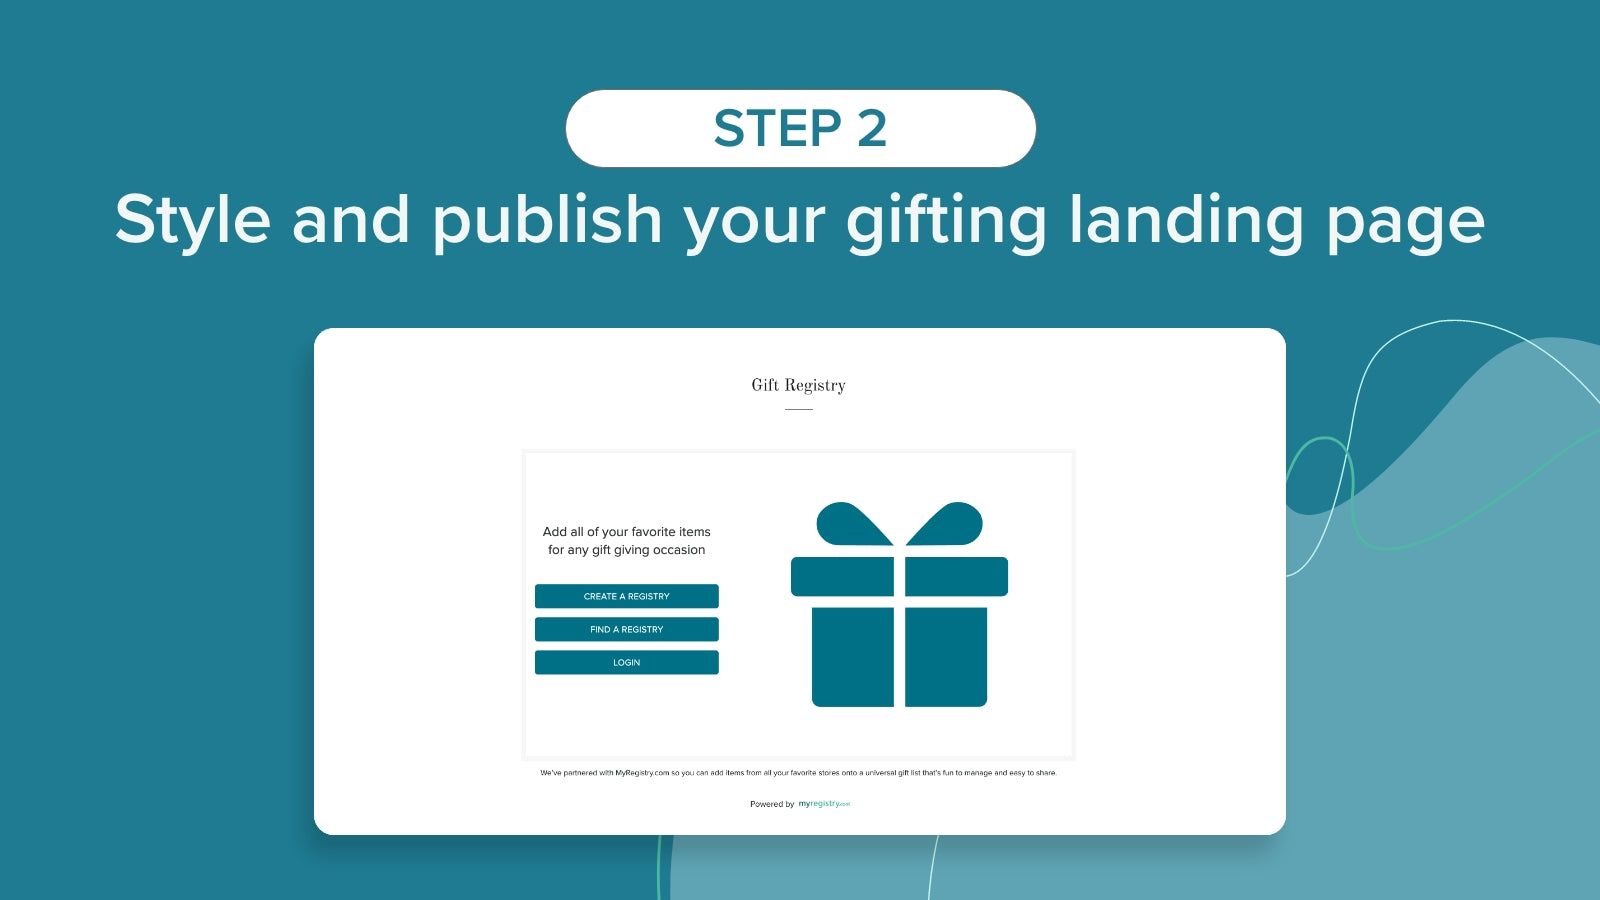 Step 2, style and publish your gifting landing page